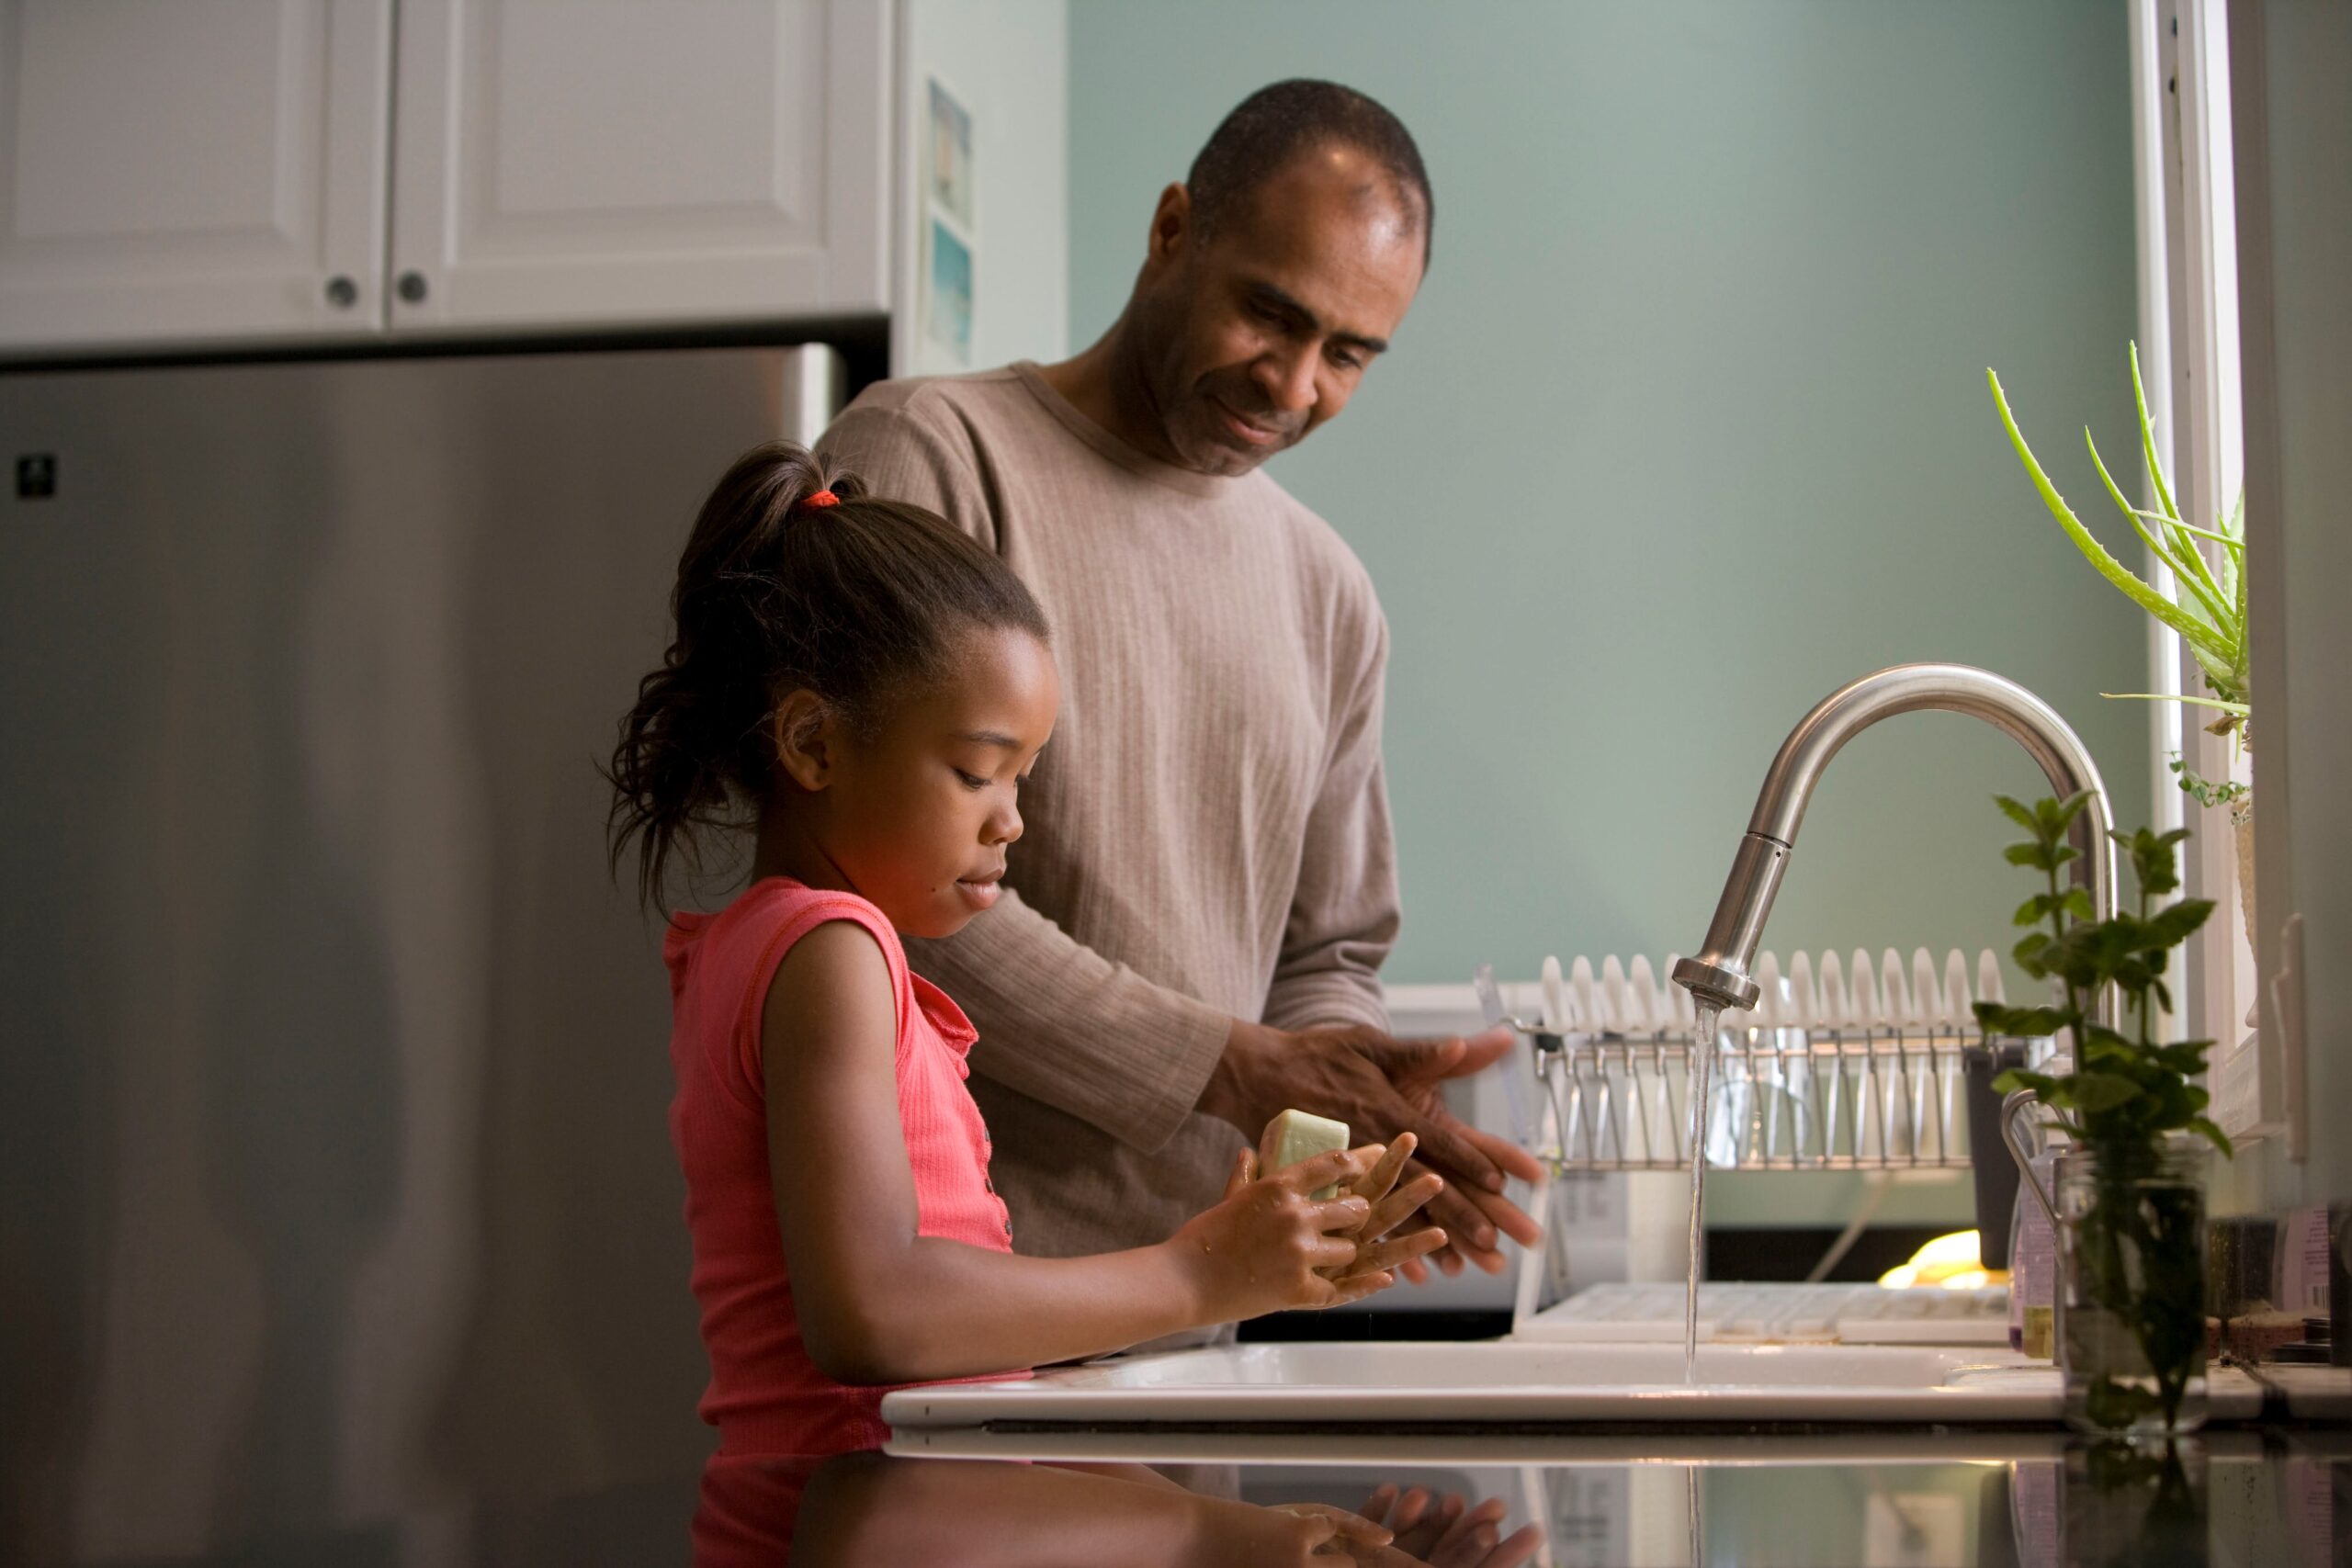 Image of a male adult washing his hands at a sink with a child